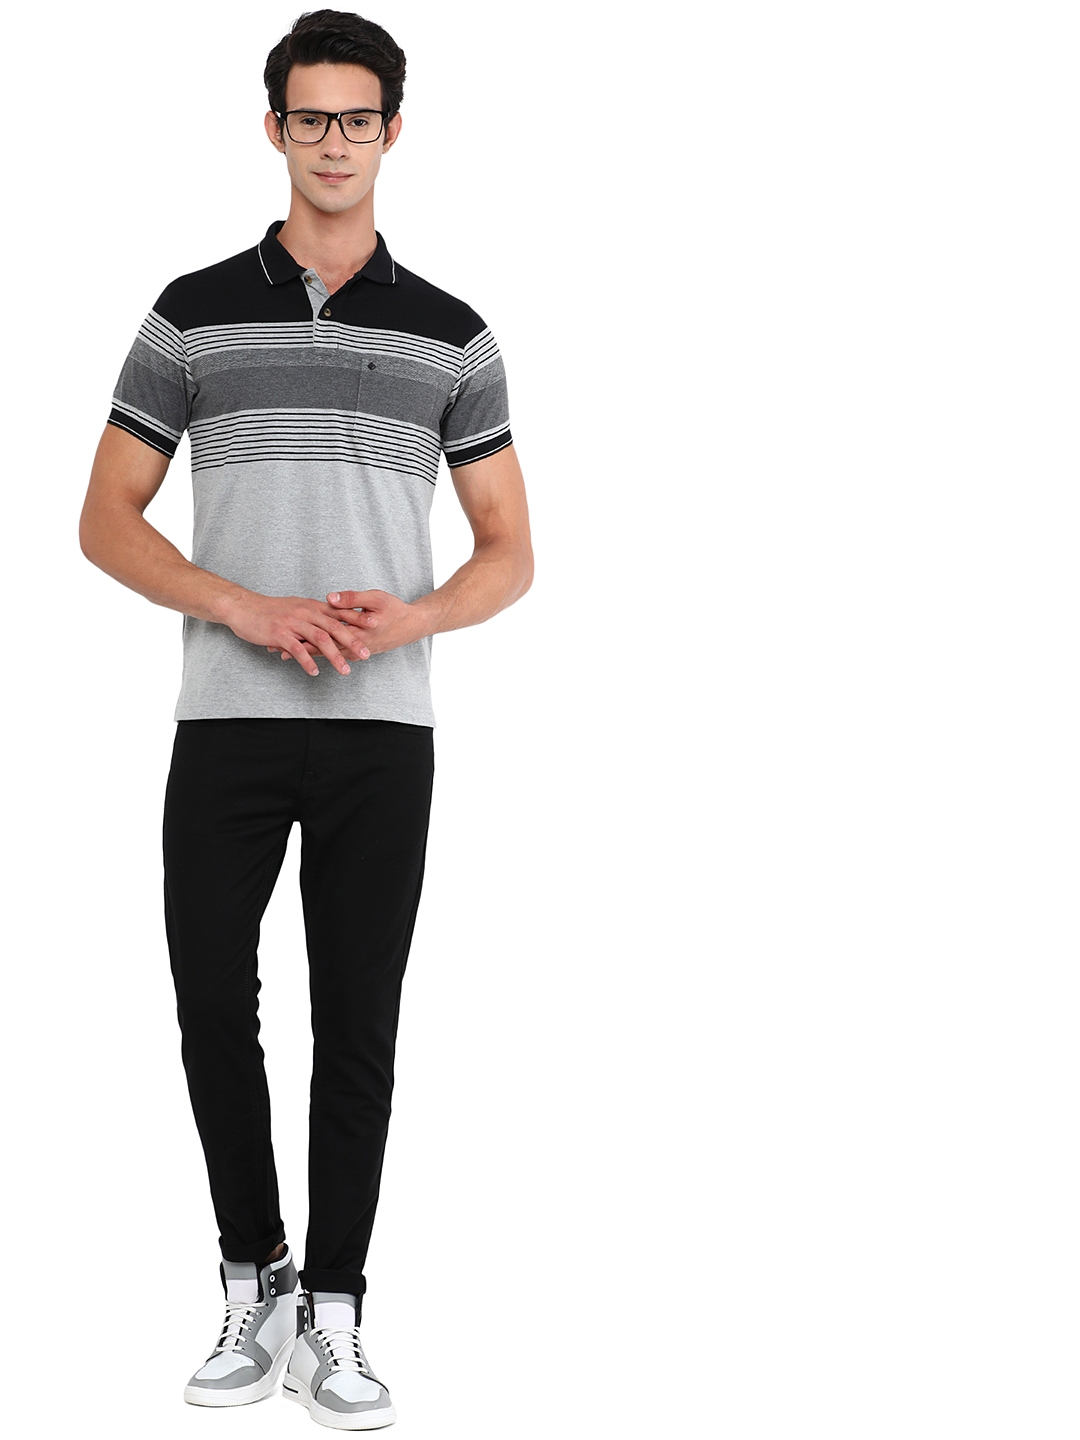 Greenfibre | Caster Grey Striped Slim Fit Polo T-Shirt | Greenfibre 3